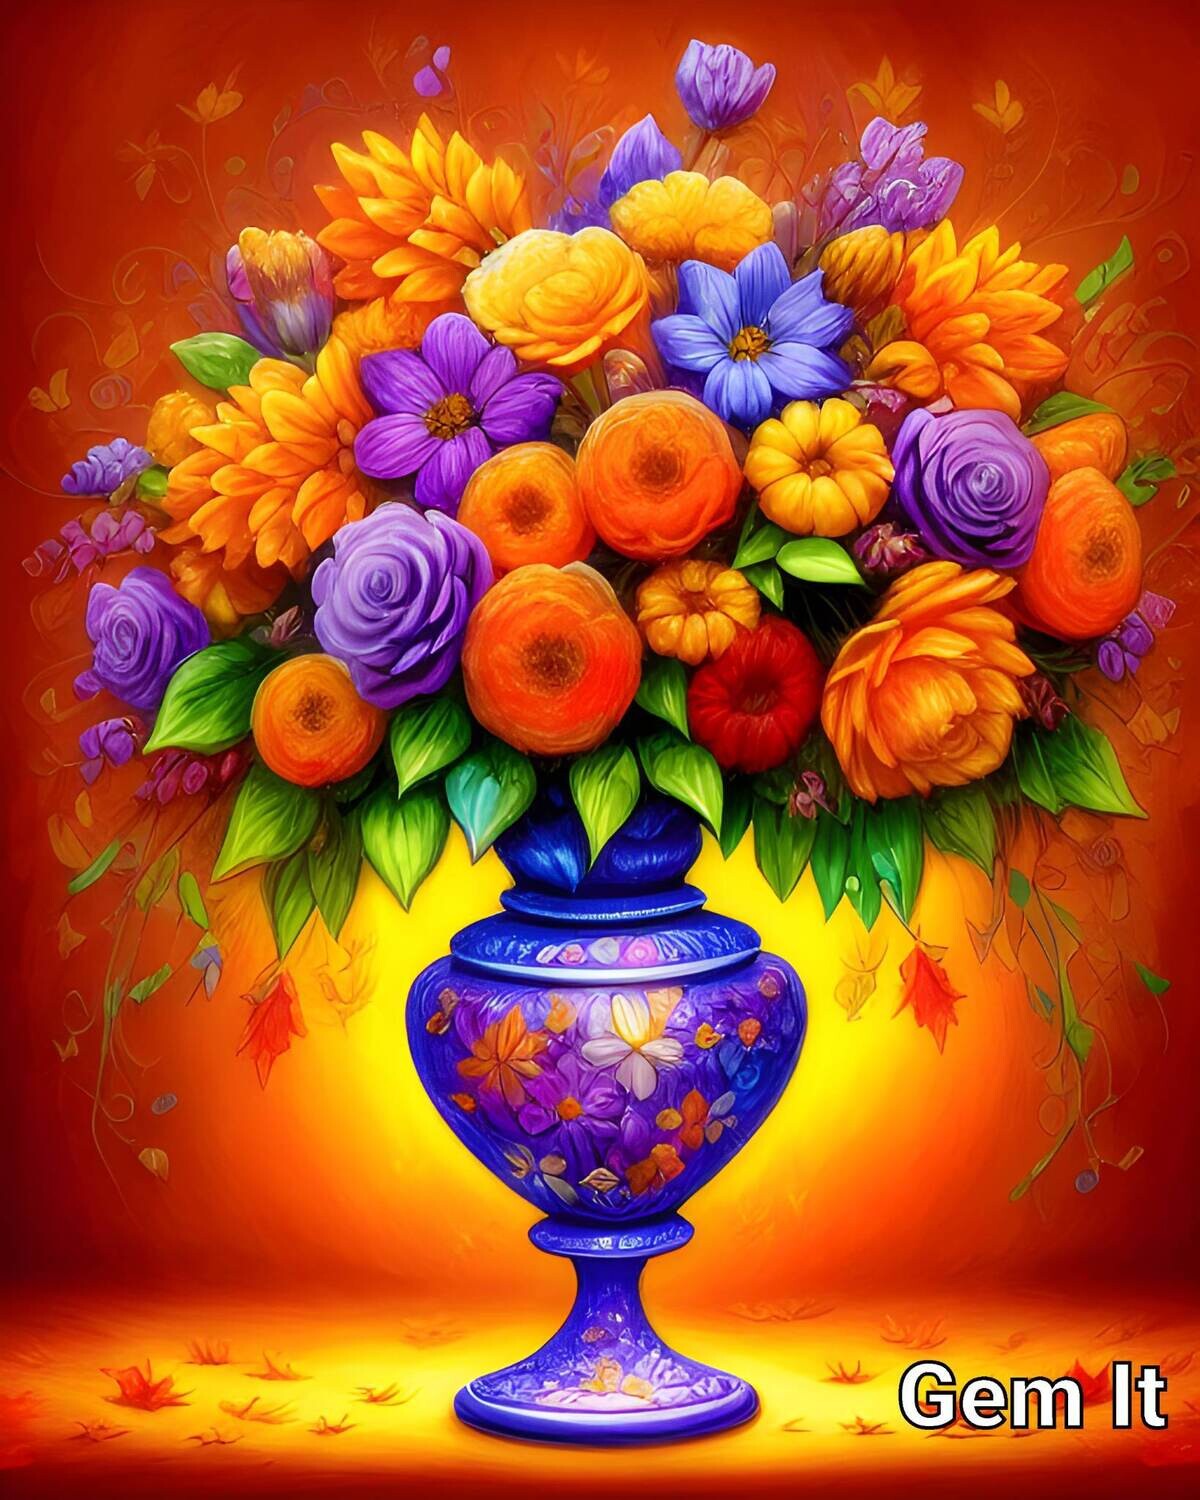 Vase of Flowers F - Specially ordered for you. Delivery is approximately 4 - 6 weeks.